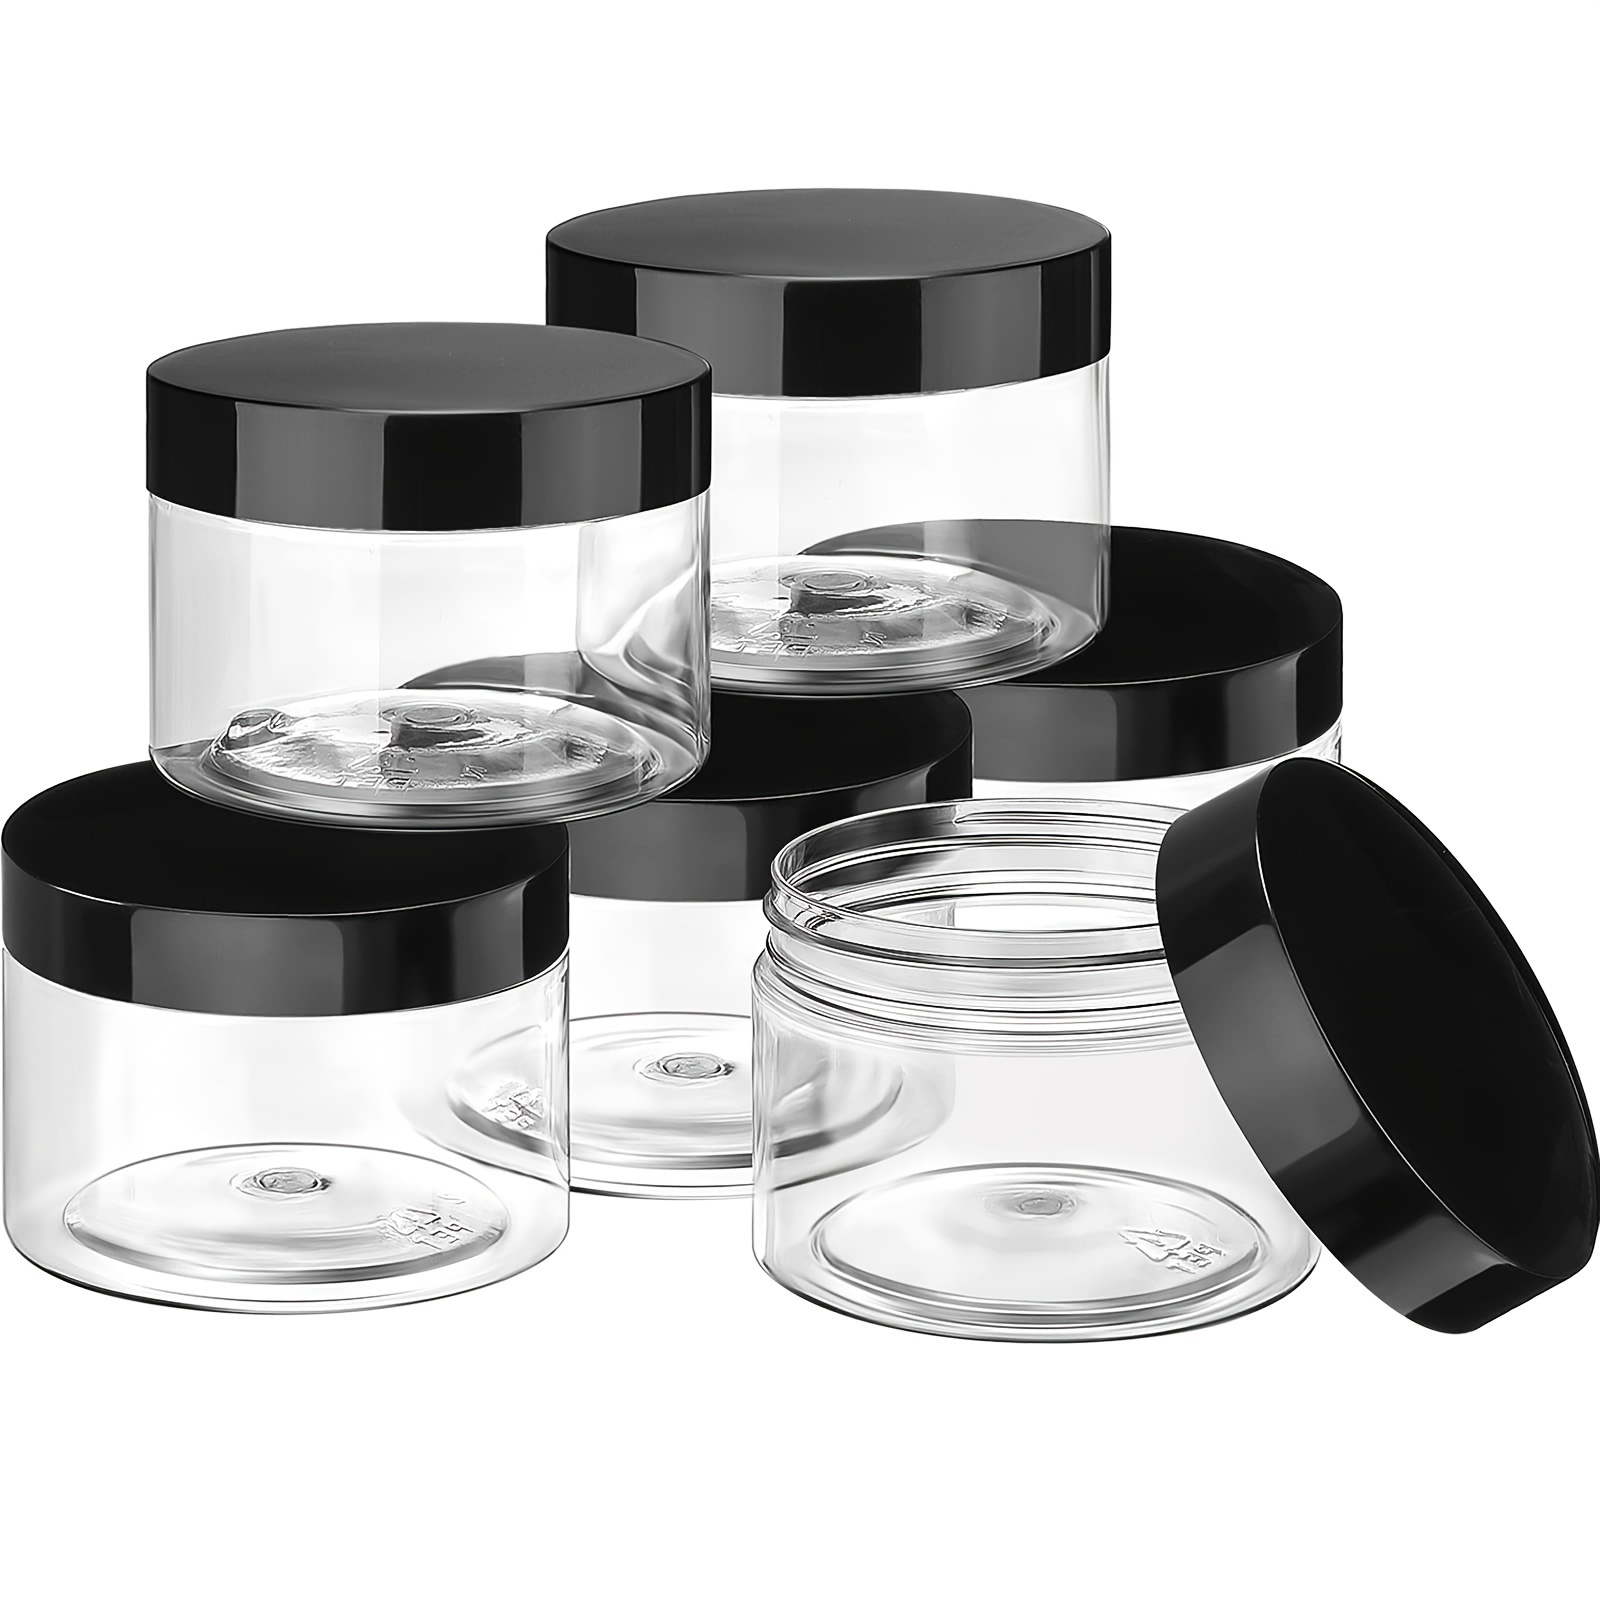 30ml/40ml/50ml/60ml/80ml Clear Plastic Jar with Lids Refillable Empty  Cosmetic Containers Jar for Travel Storage Make Up